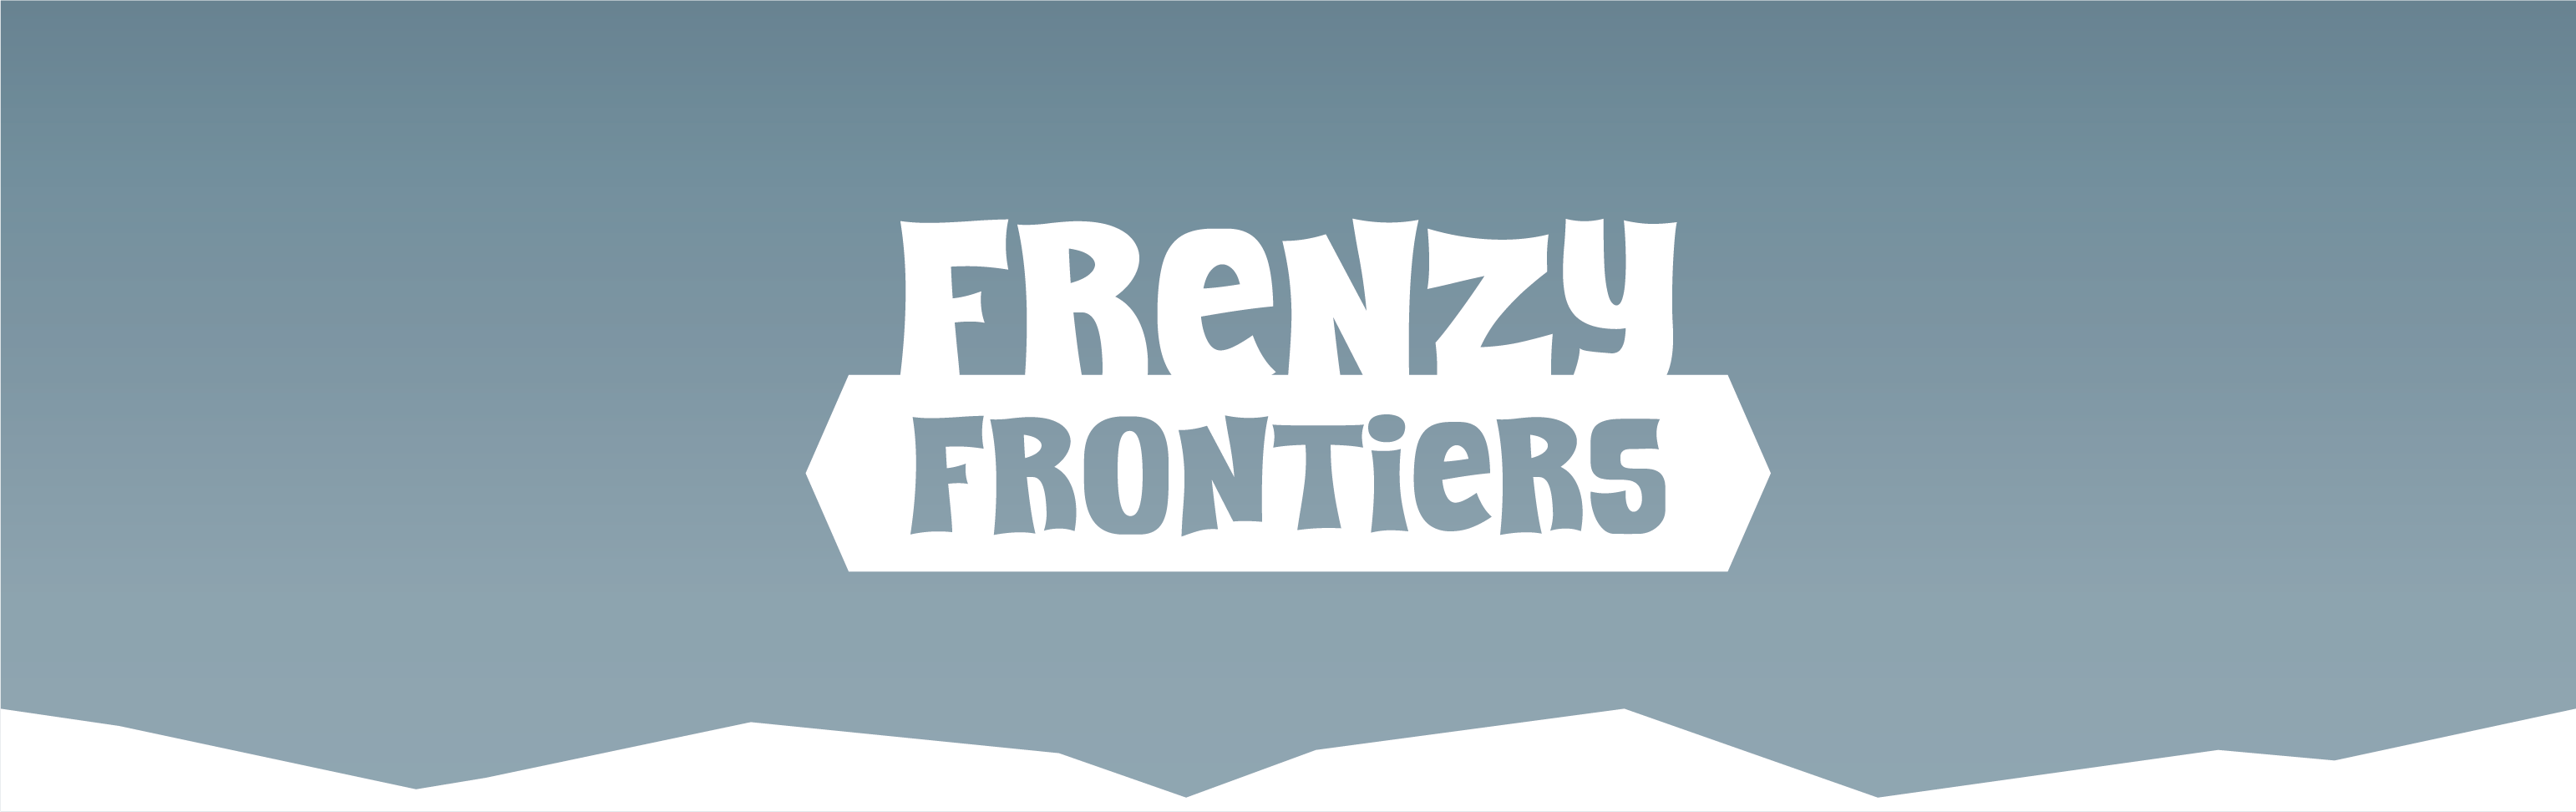 Frenzy Frontiers